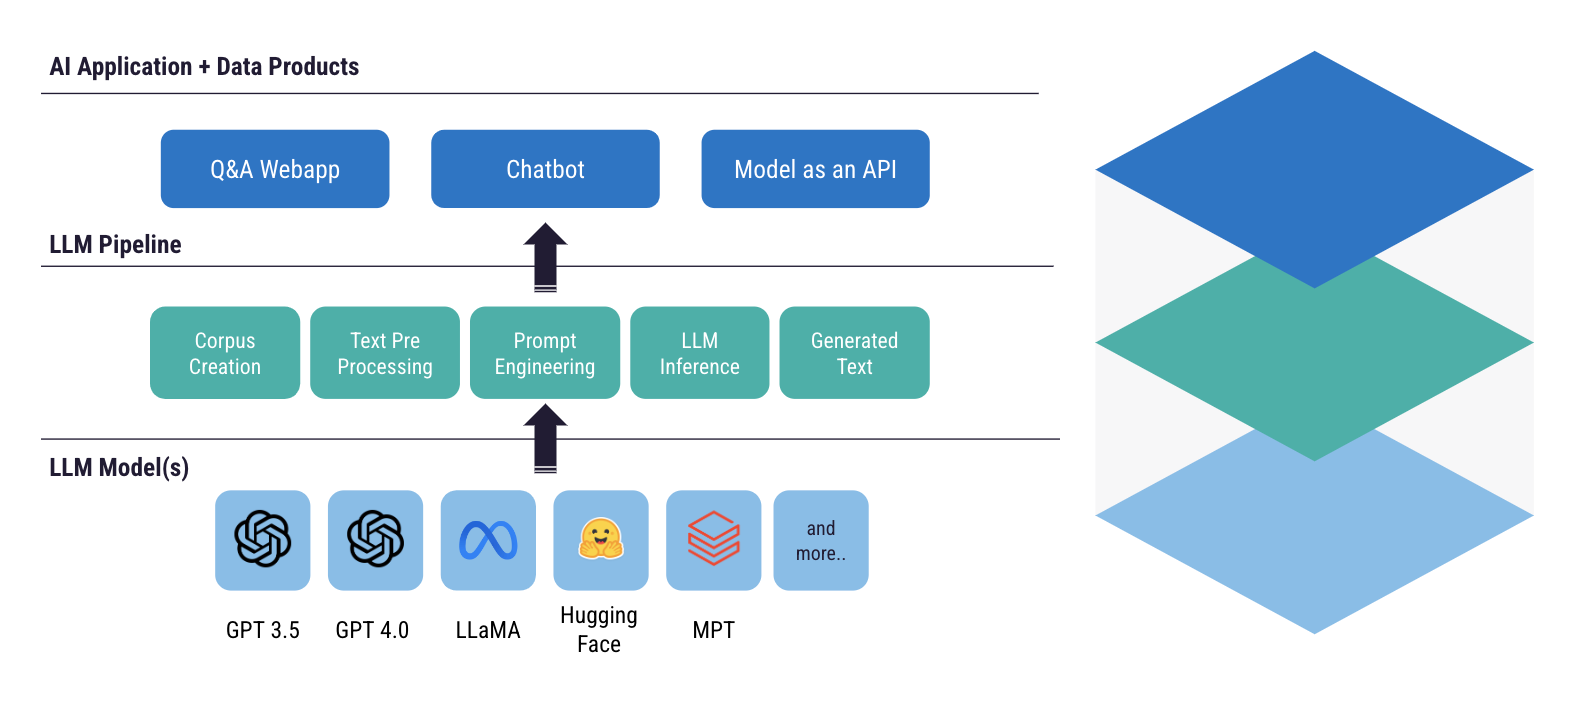 LLM tech stack for MVP or POC applications